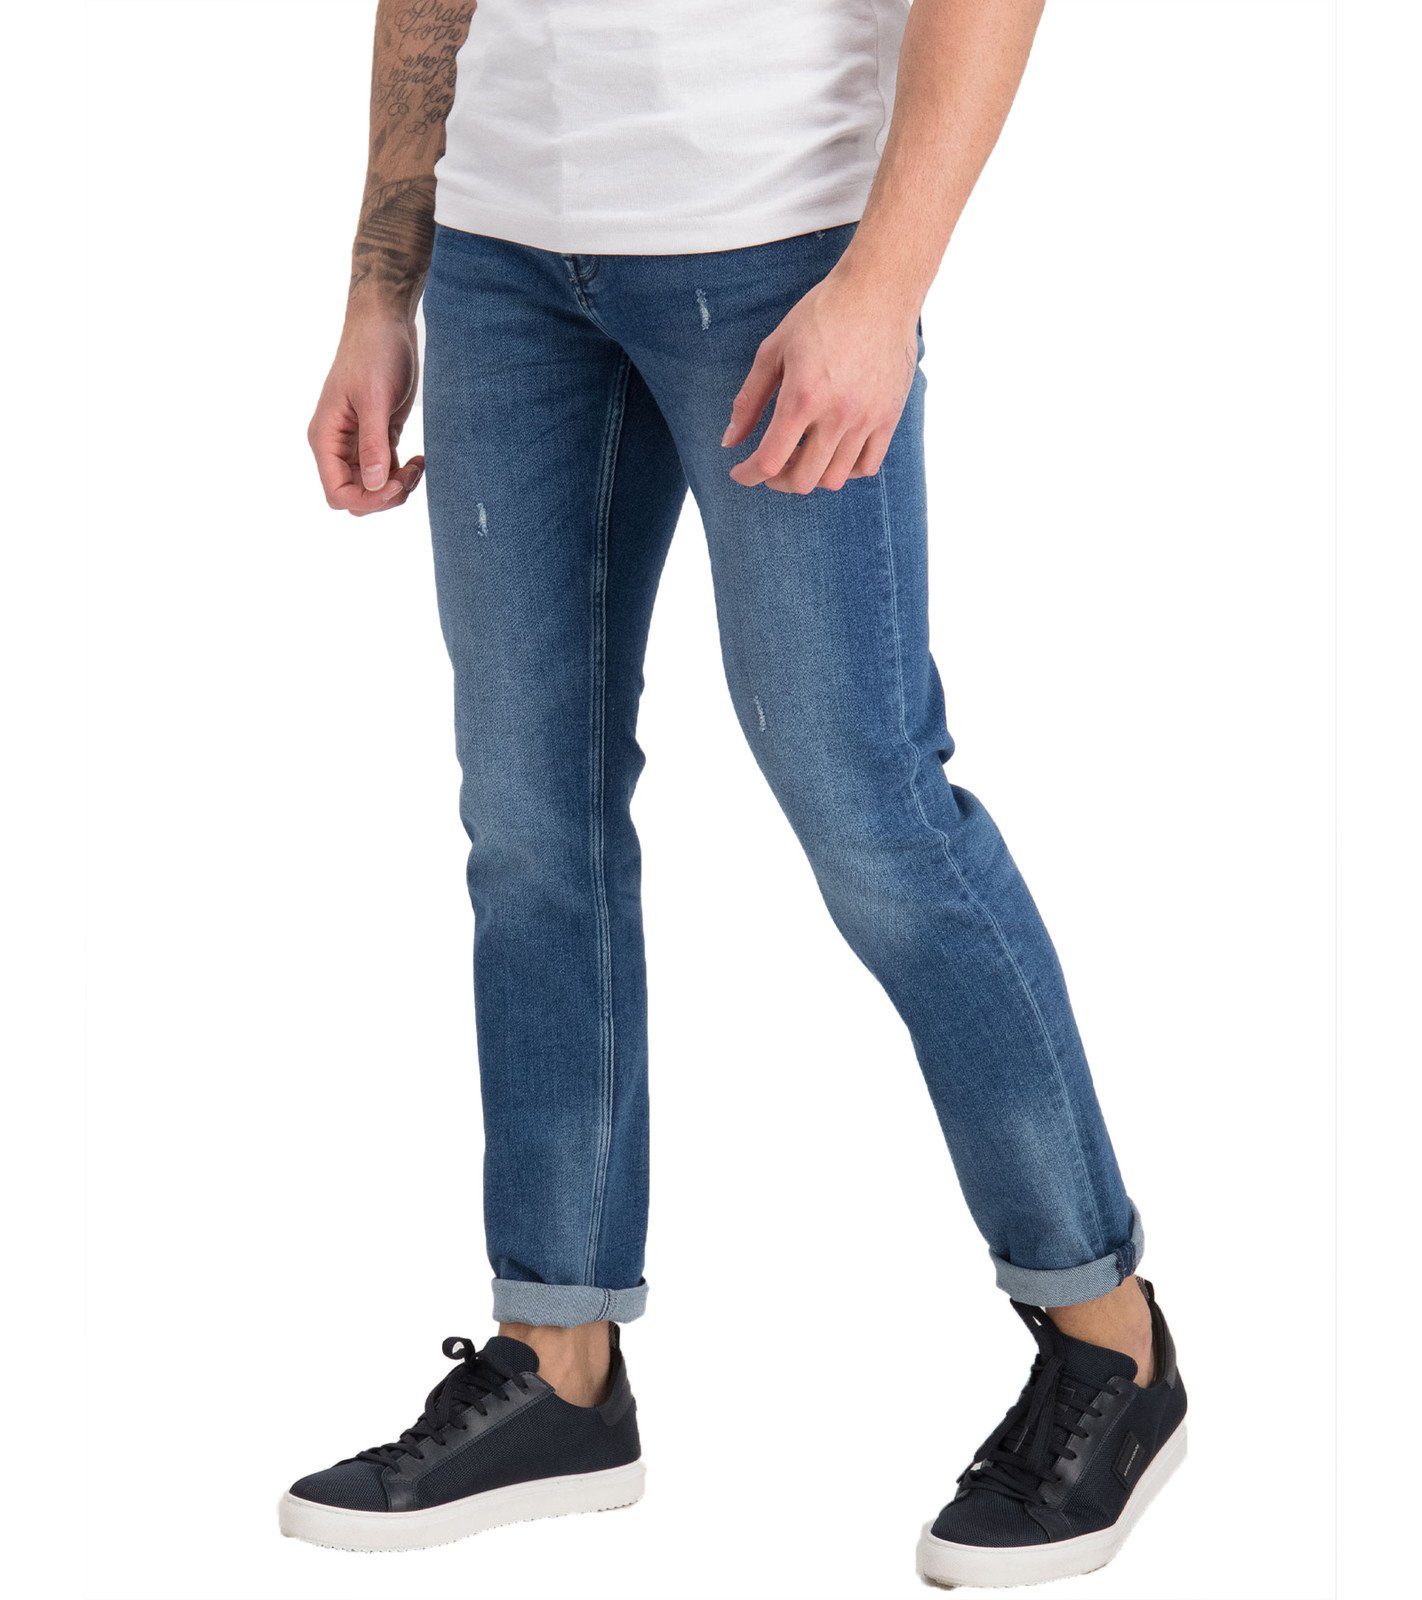 ONLY & SONS Stoffhose »ONLY & SONS Herren Used Look-Jeans Slim Fit Hose  Loom Freizeit-Hose Blau« online kaufen | OTTO